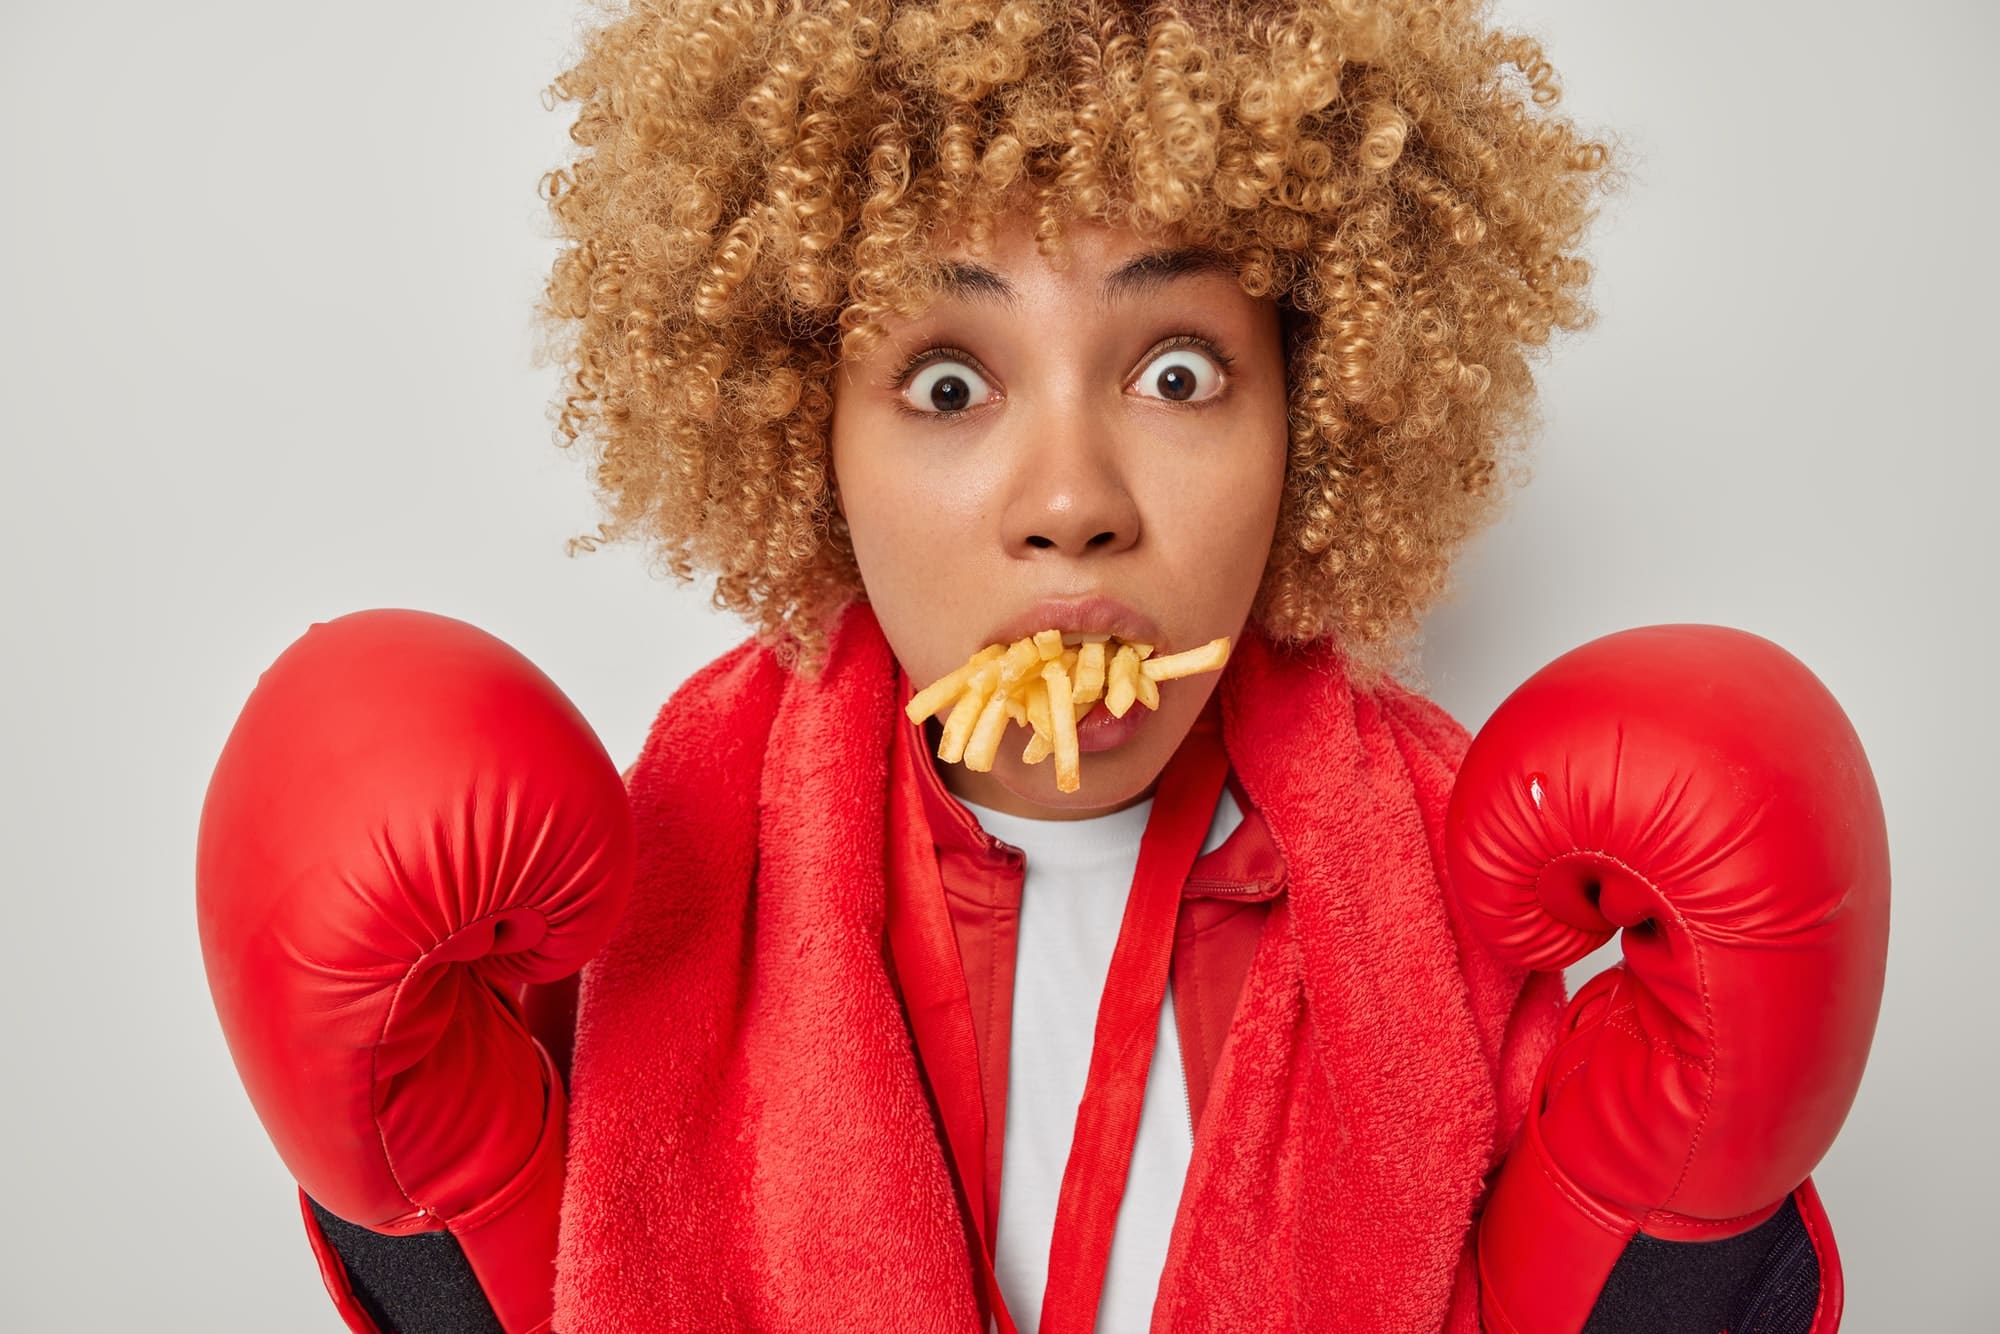 curly-haired woman wearing boxing gloves has a mouth full of french fries. enjoys a power lunch